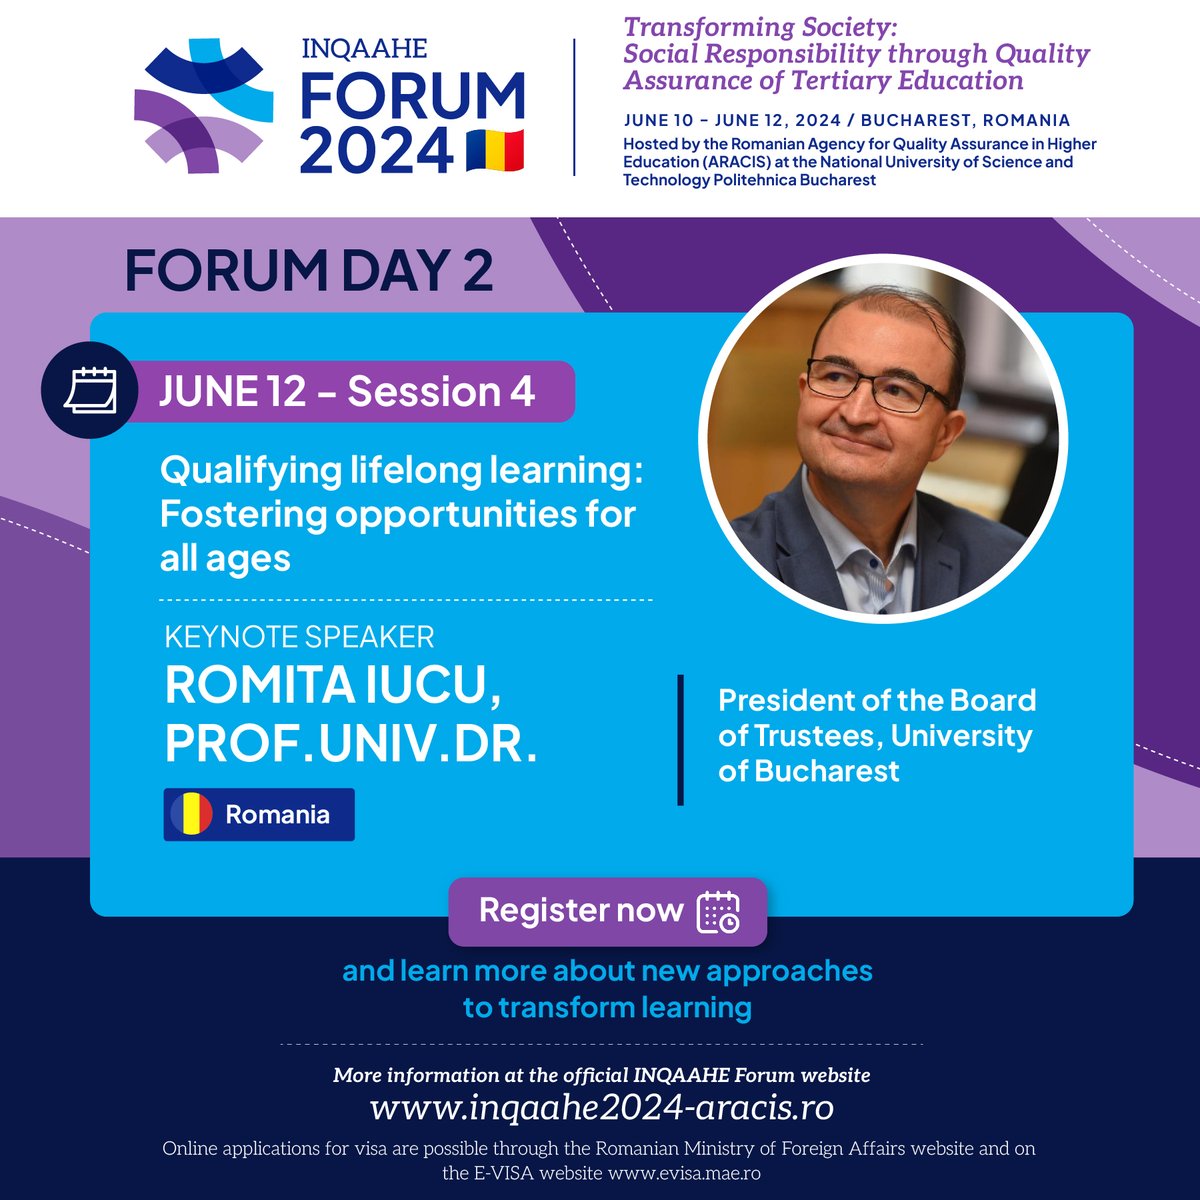 We're honored to welcome Romita IUCU, Prof. Univ. Dr., from the University of Bucharest, for his keynote address on 'Qualifying lifelong learning: Fostering opportunities for all ages' at #INQAAHEForum2024 (Session 4, June 12). Learn more: inqaahe.org/blog/forum-202…